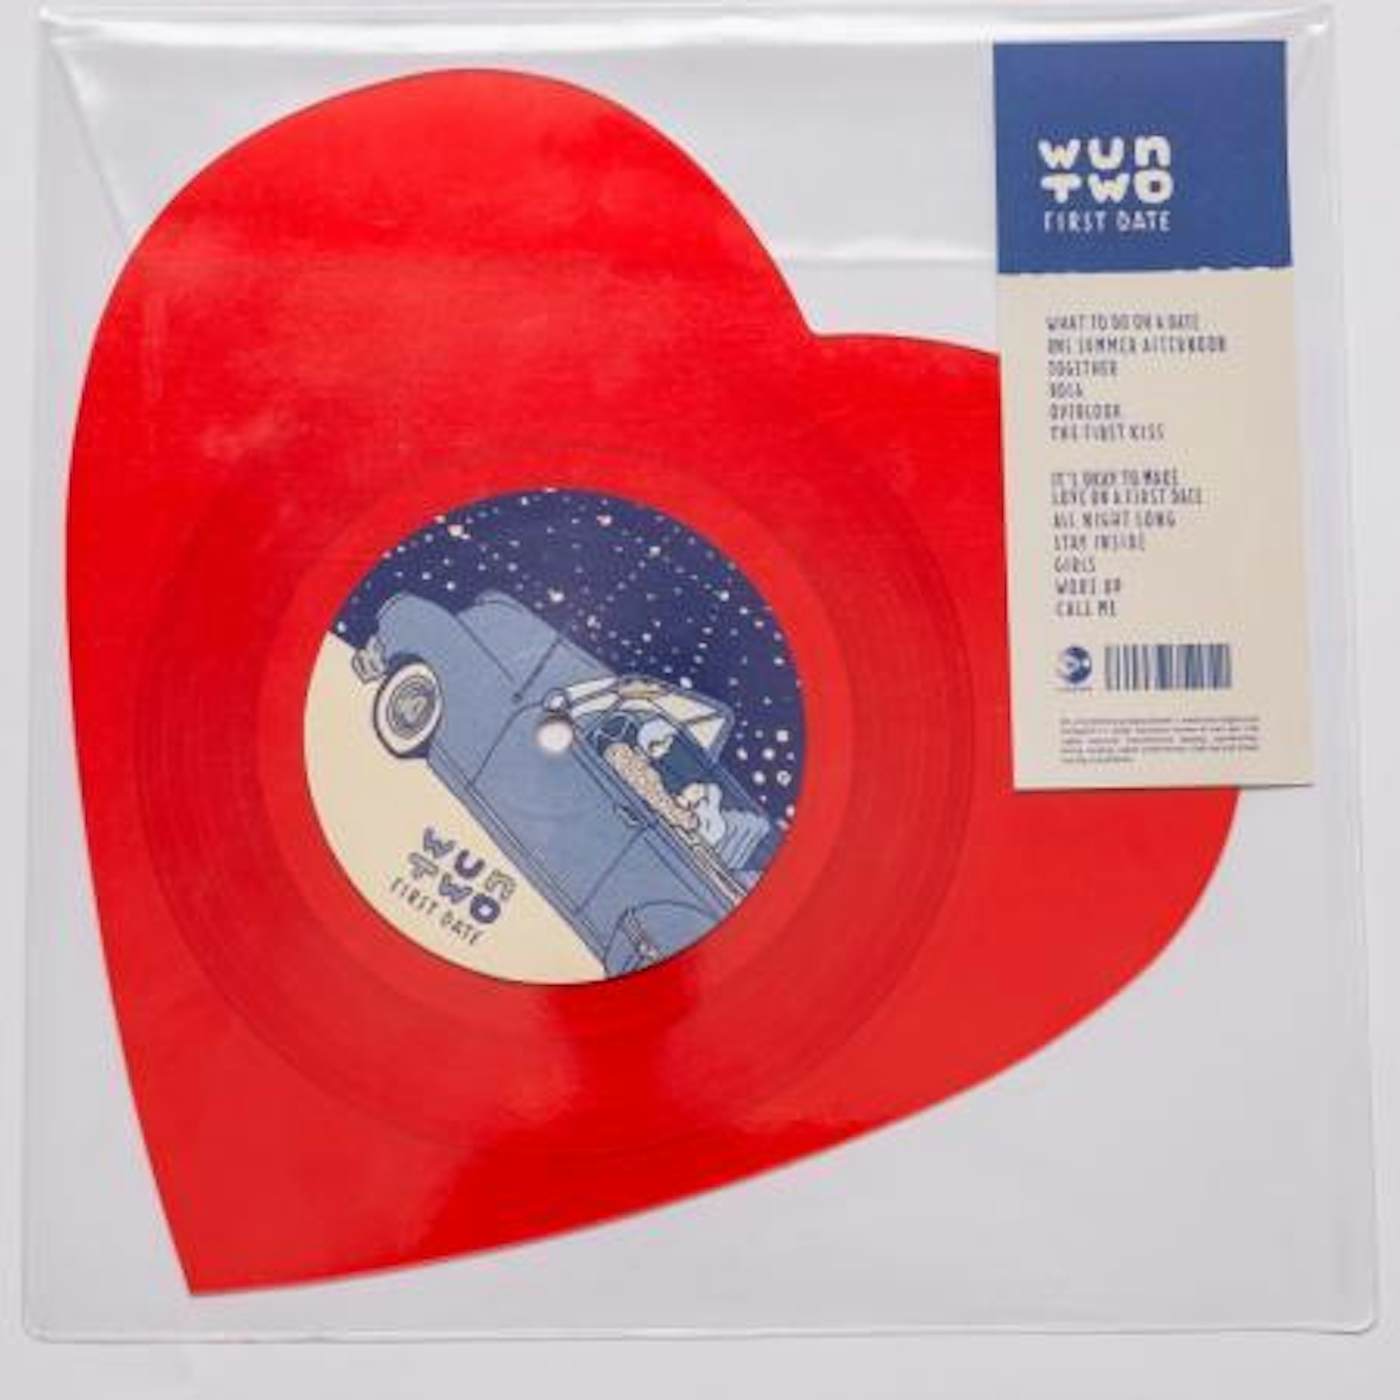 Wun Two FIRST DATE (HEART SHAPED 7) Vinyl Record